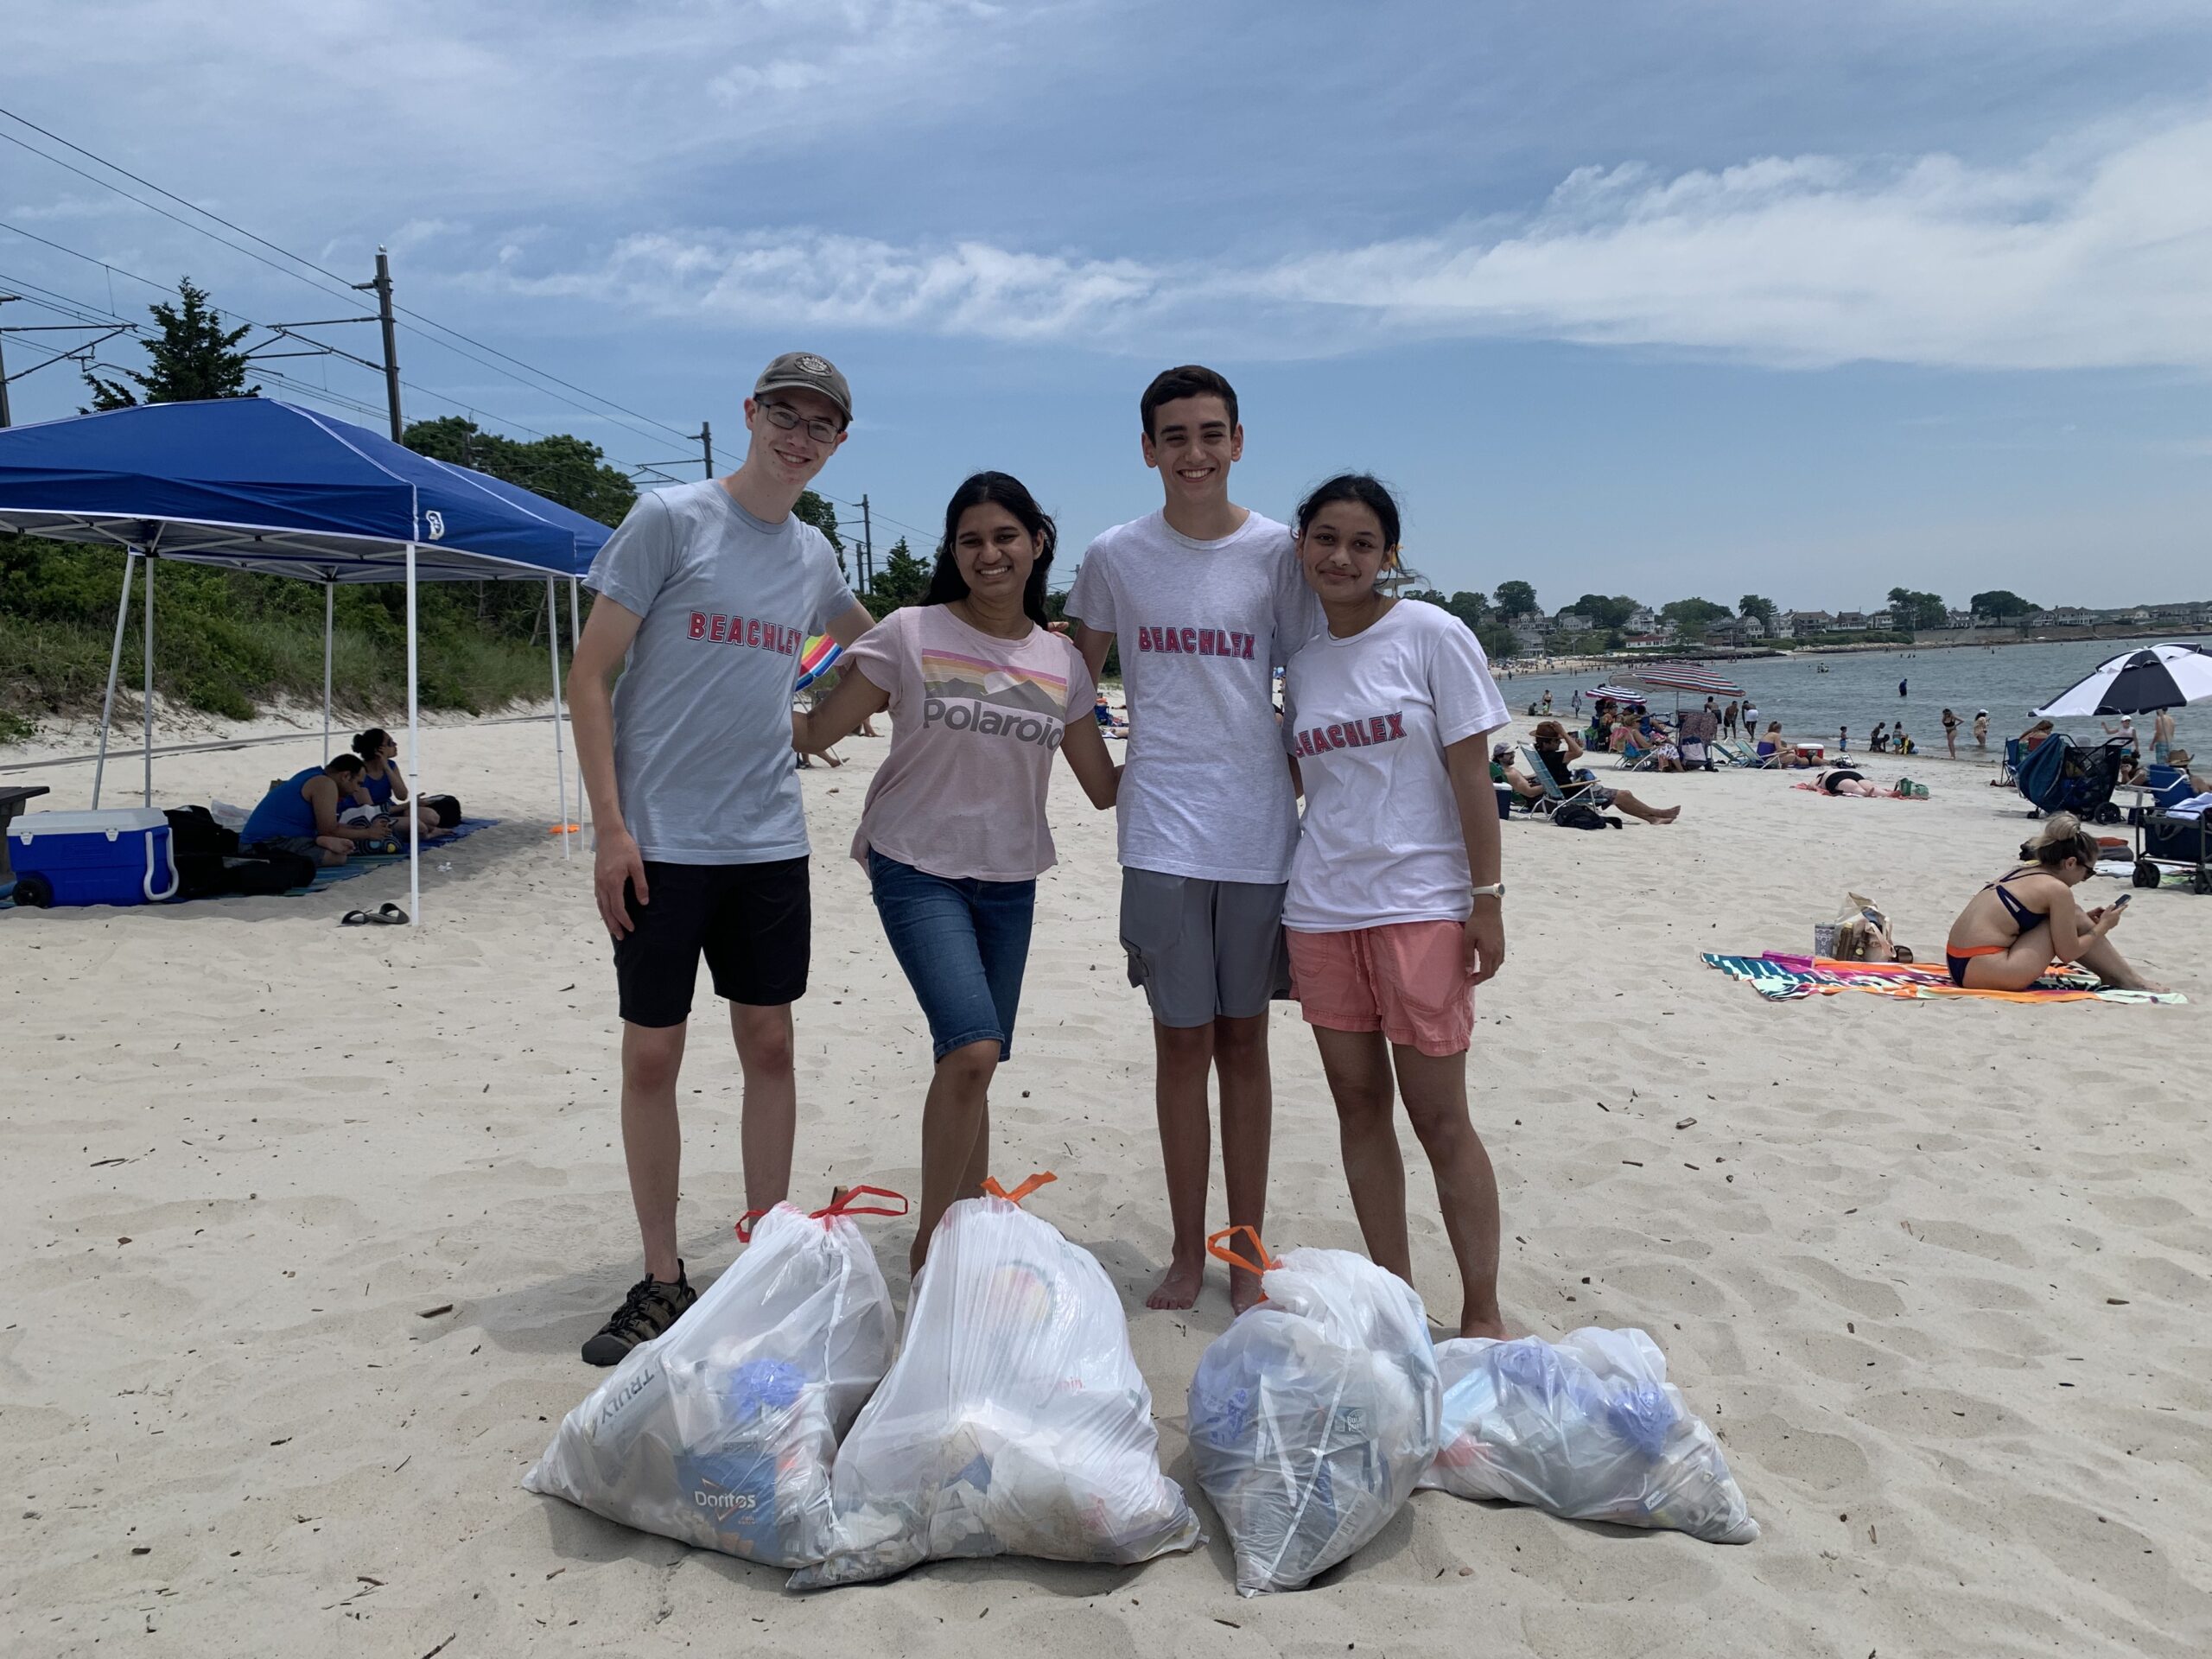 Independent Thoughts: Beach day for local students consists of cleanup work